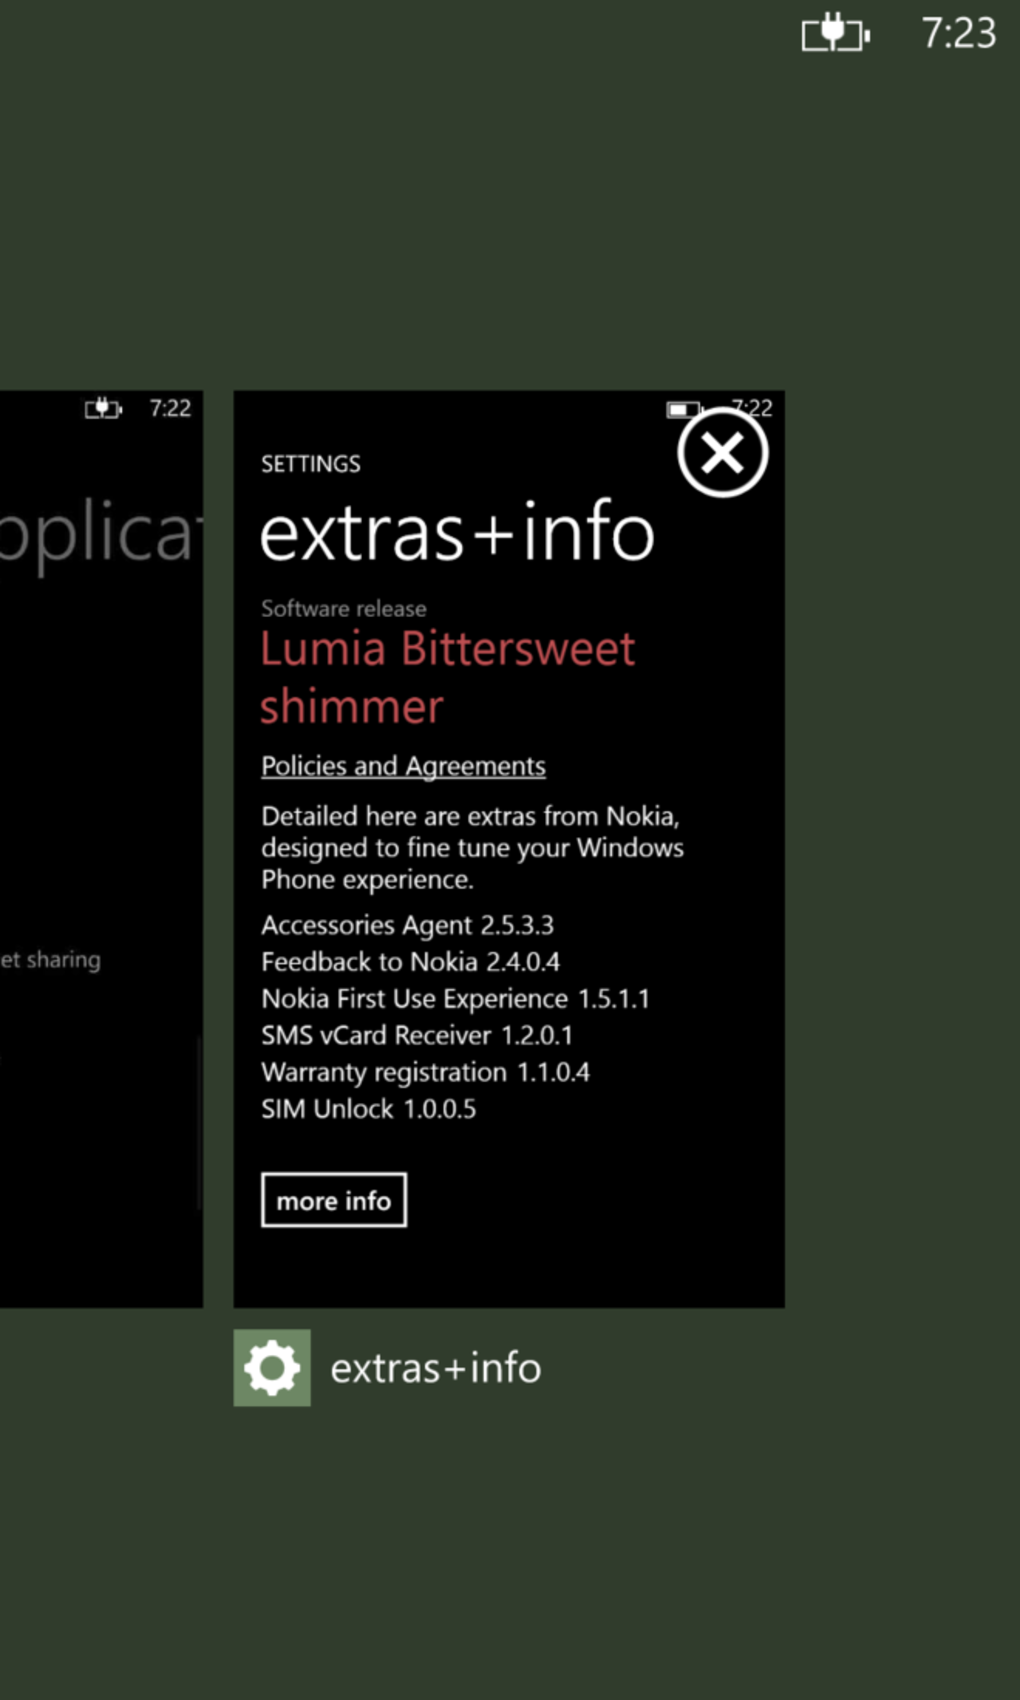 Windows Phone App switching with close button